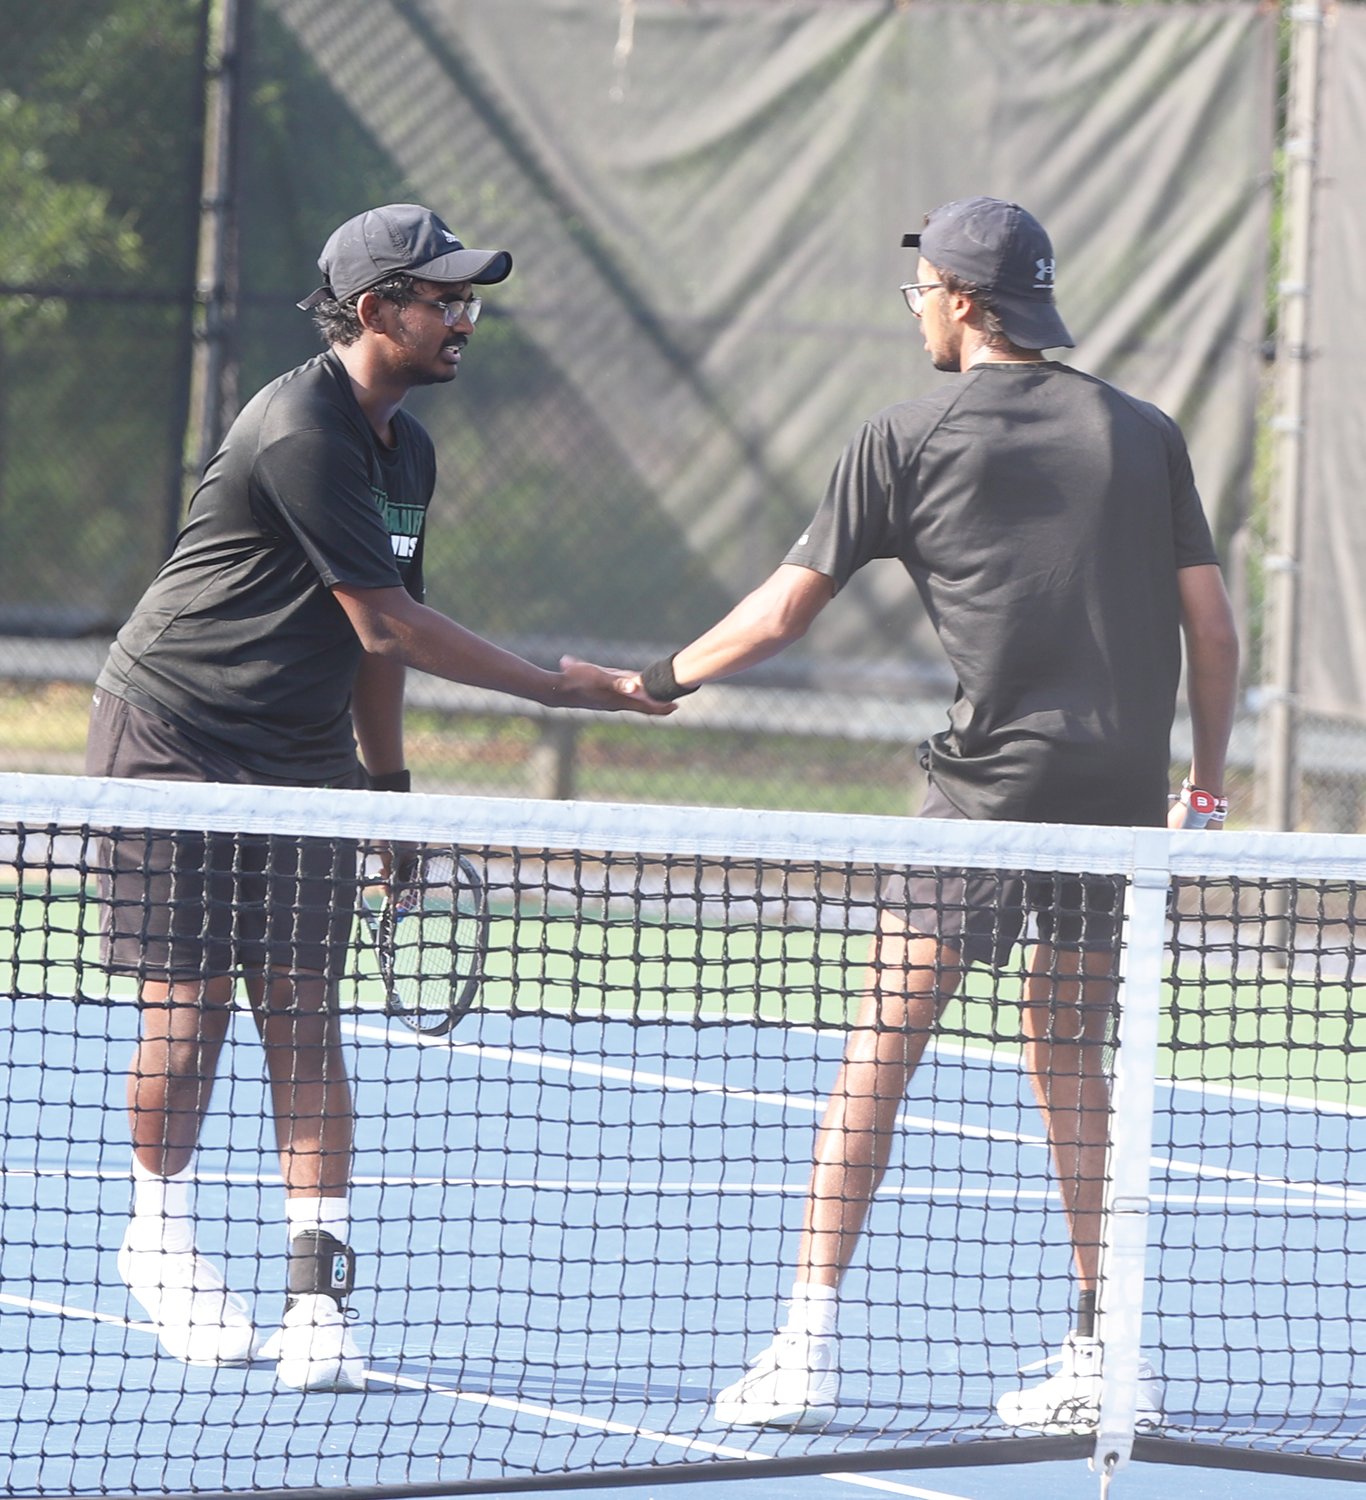 The River Bluff doubles team celebrate a point.